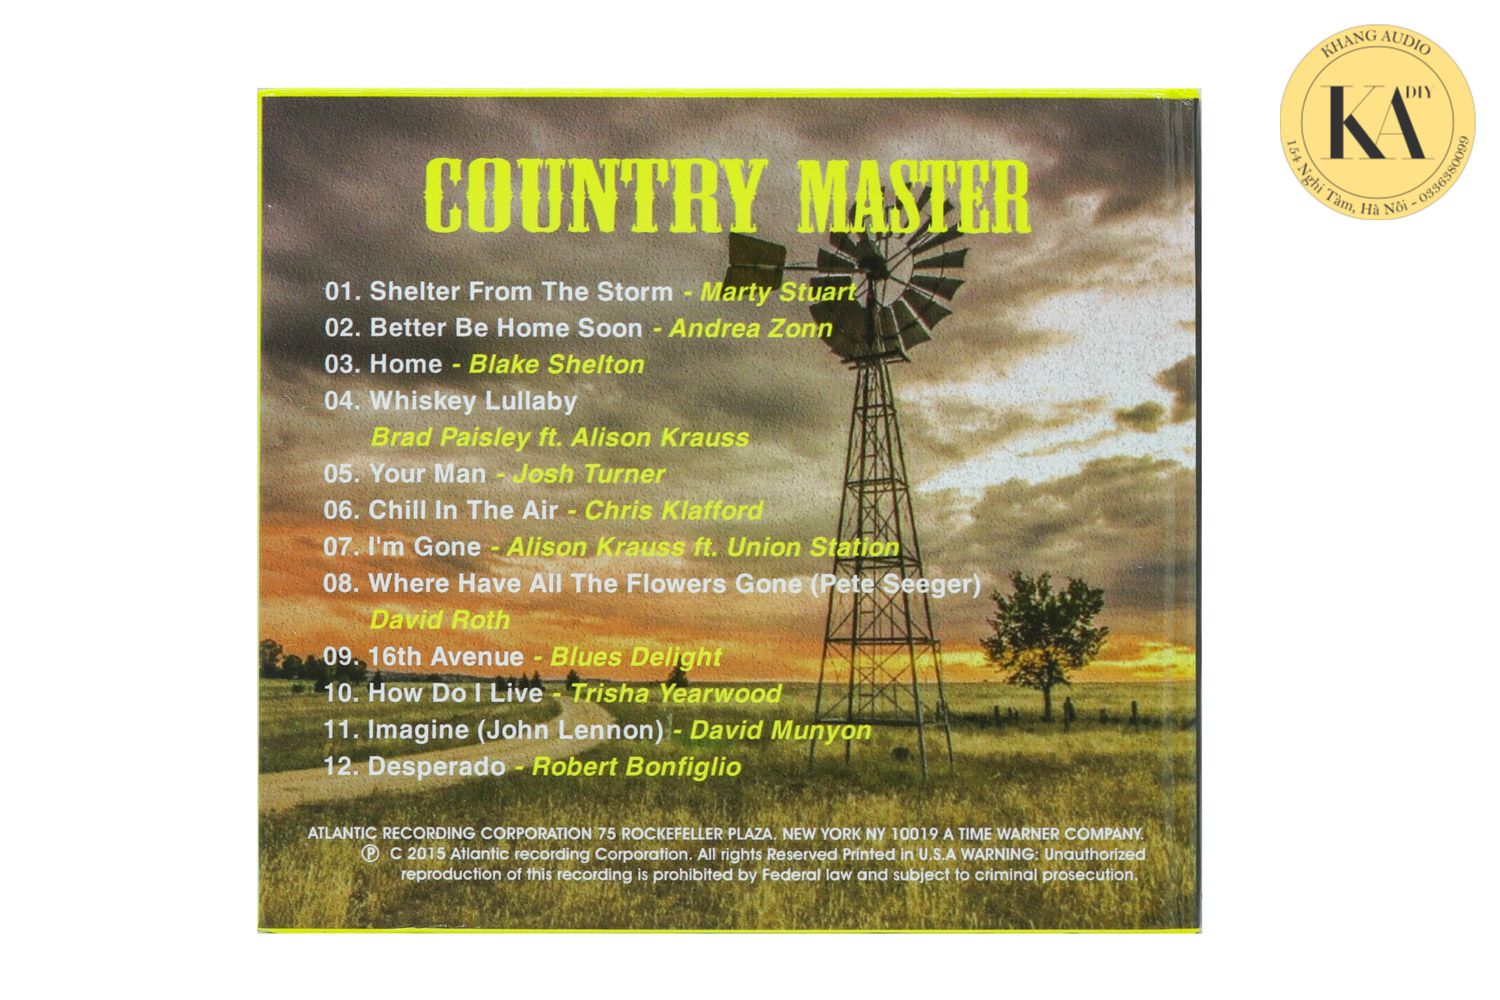 Combo CD Master: The Best Acoustic Song Khang Audio 0336380099